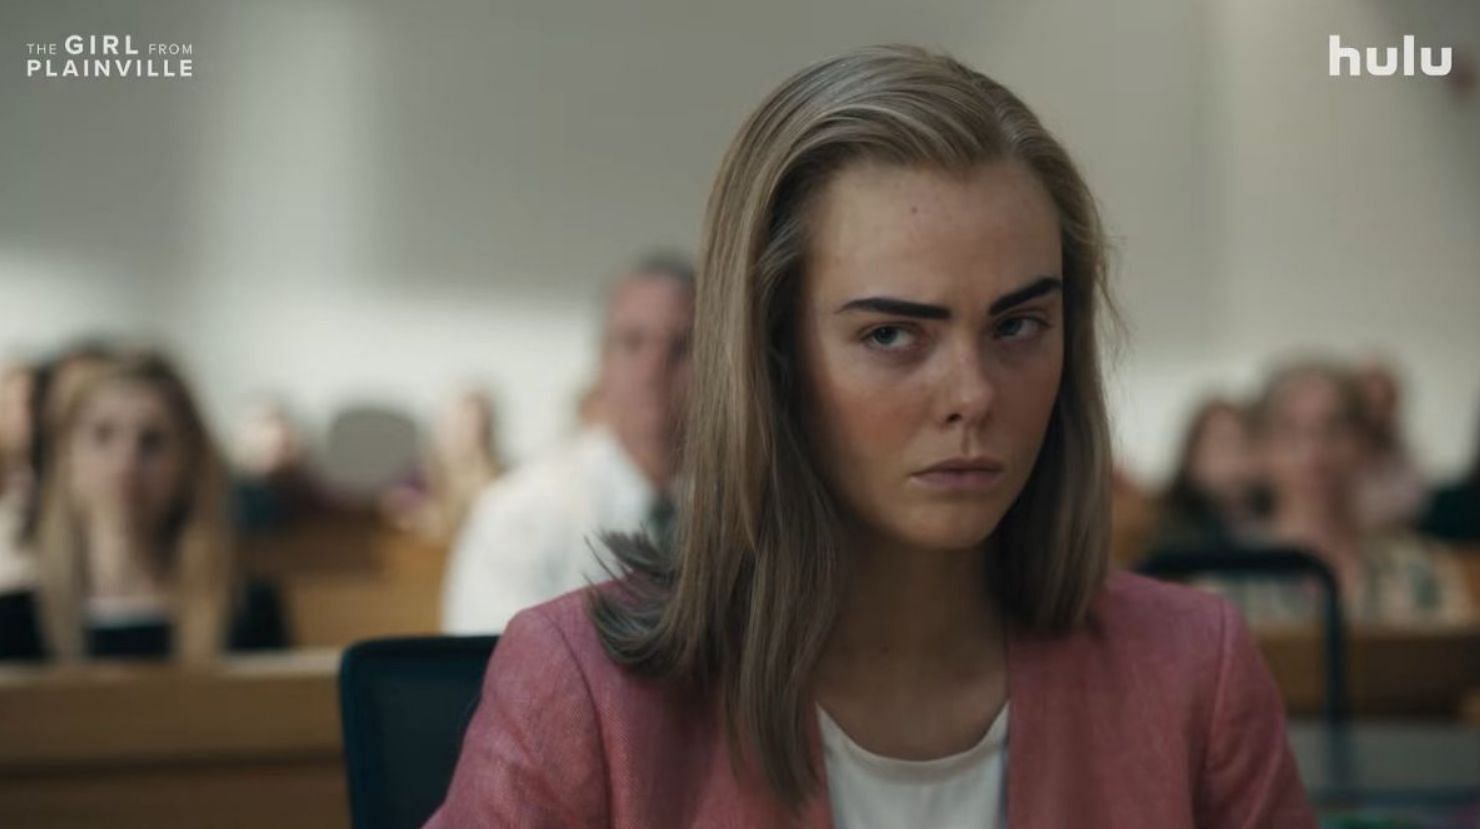 A 20-year-old Michelle Carter on trial (Image via Hulu)